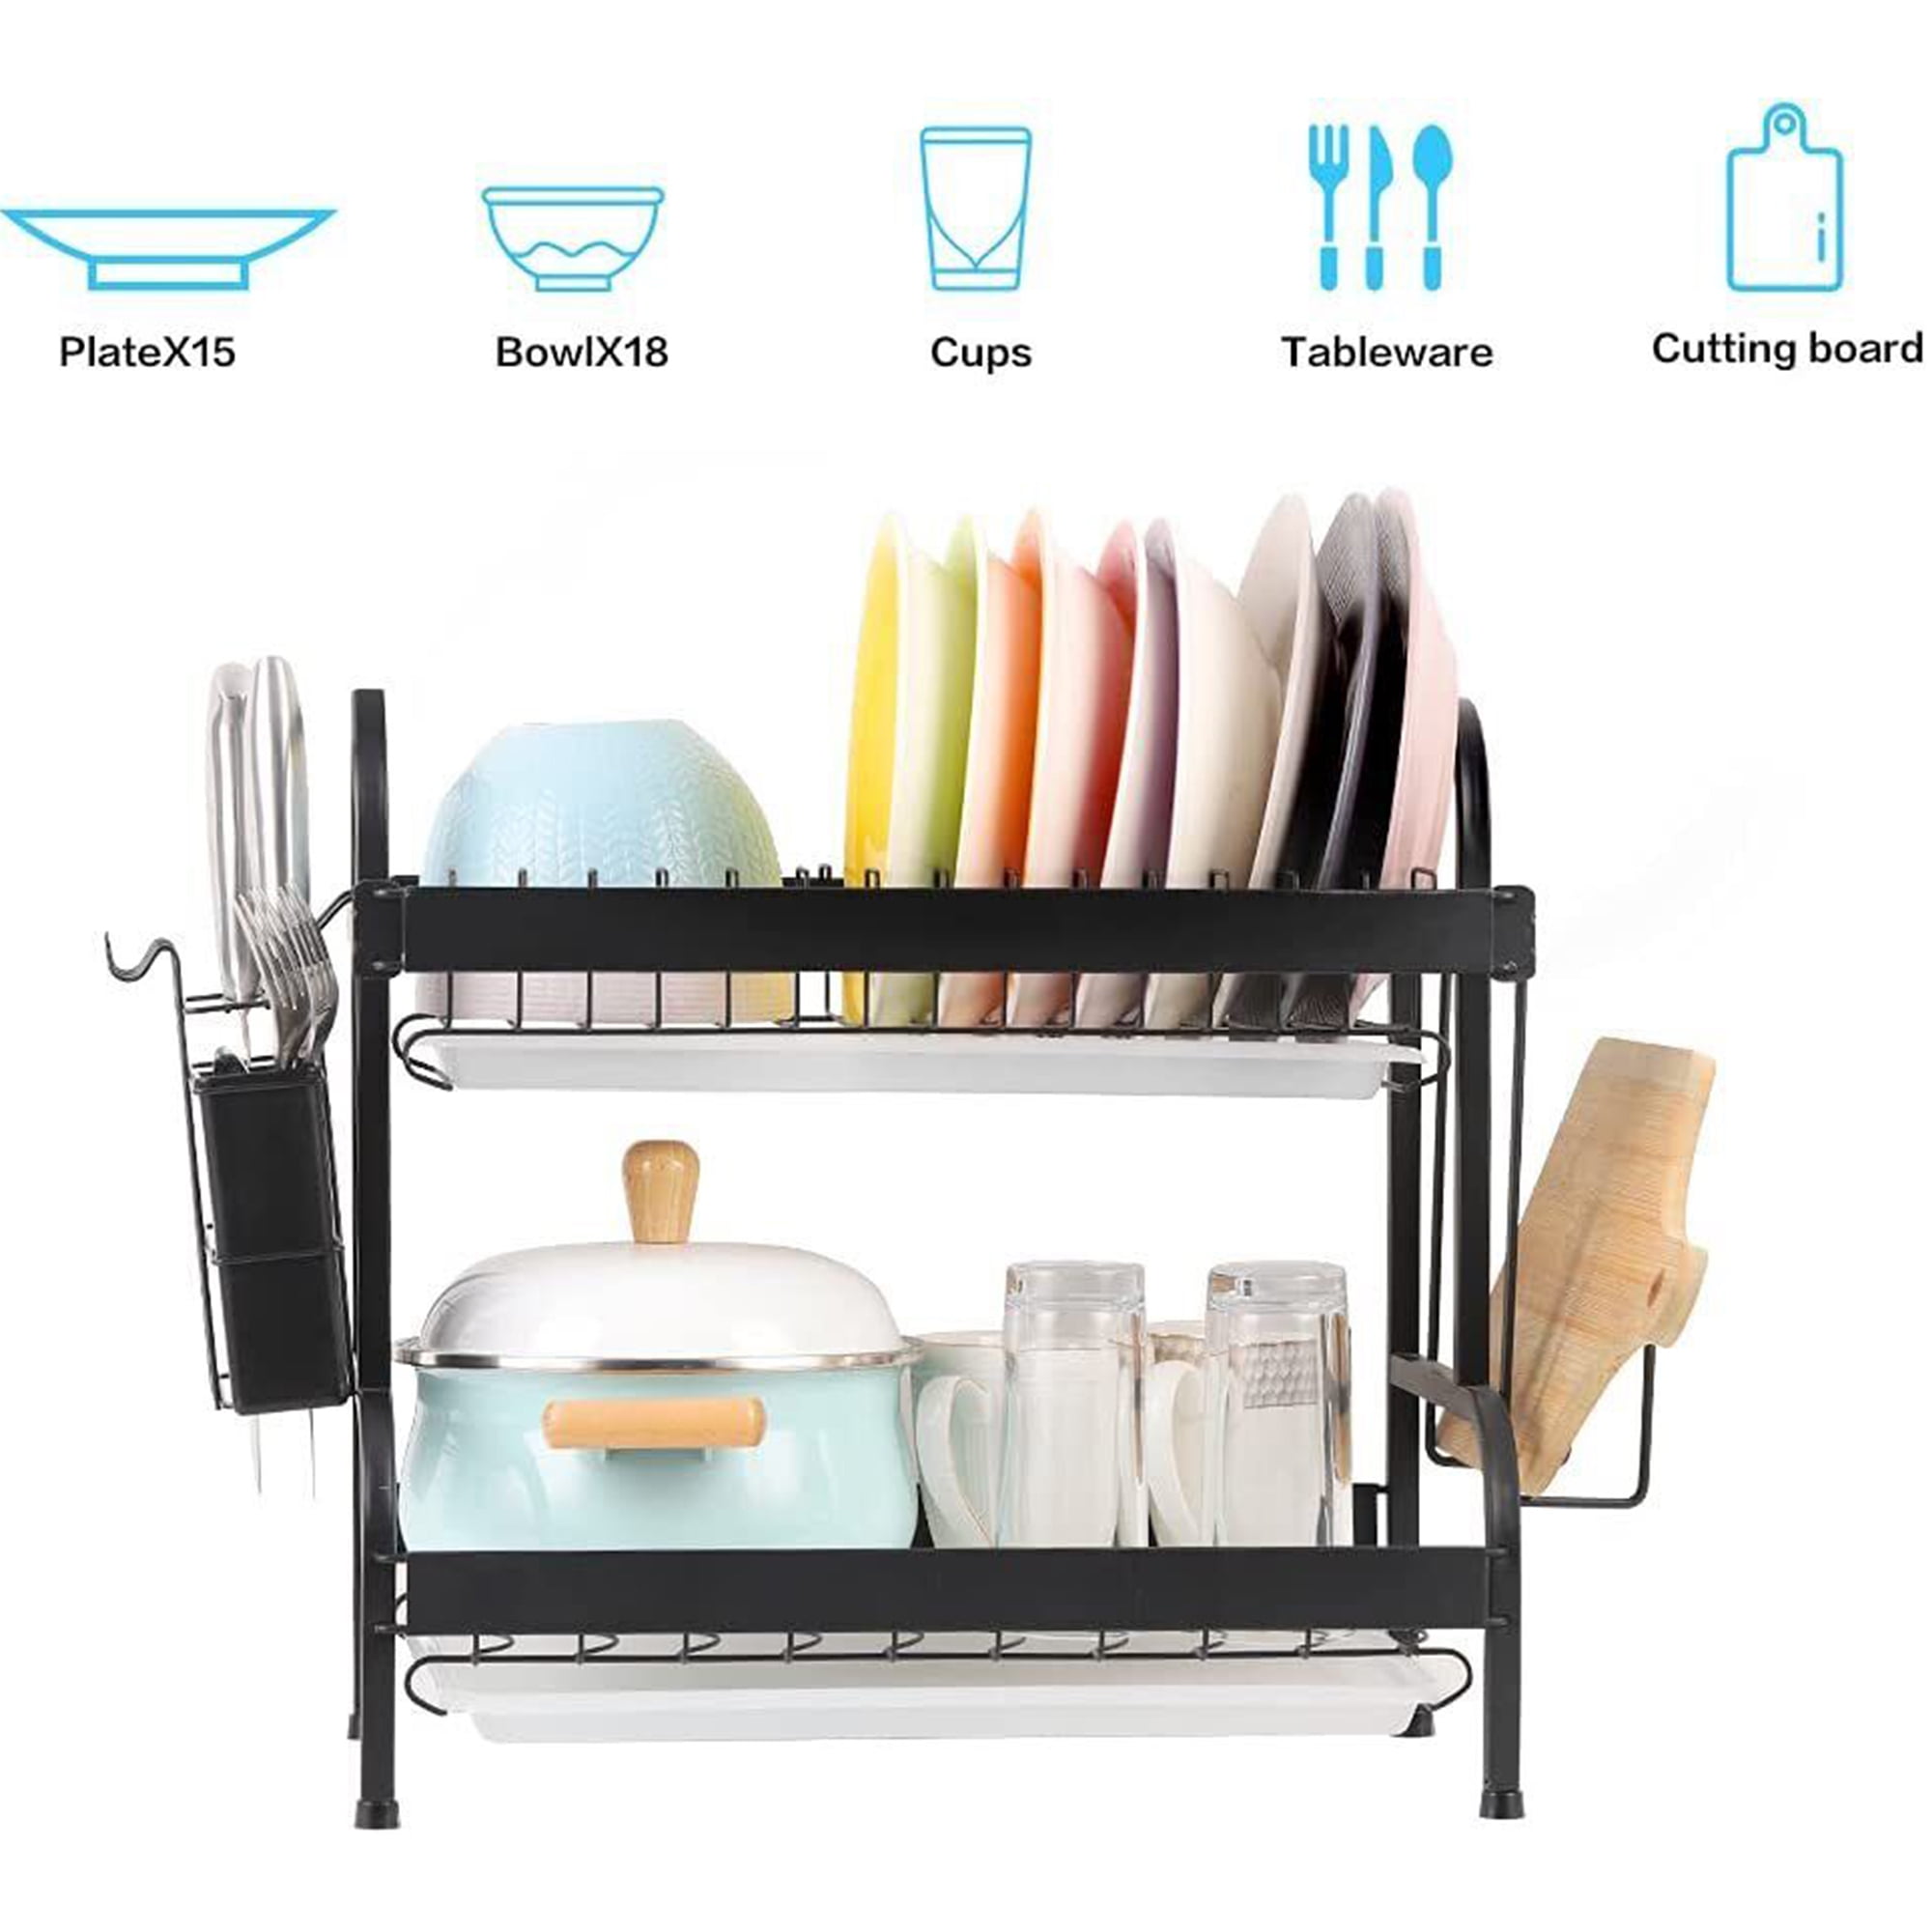  TQVAI Kitchen Dish Drainer Rack with Drying Board and